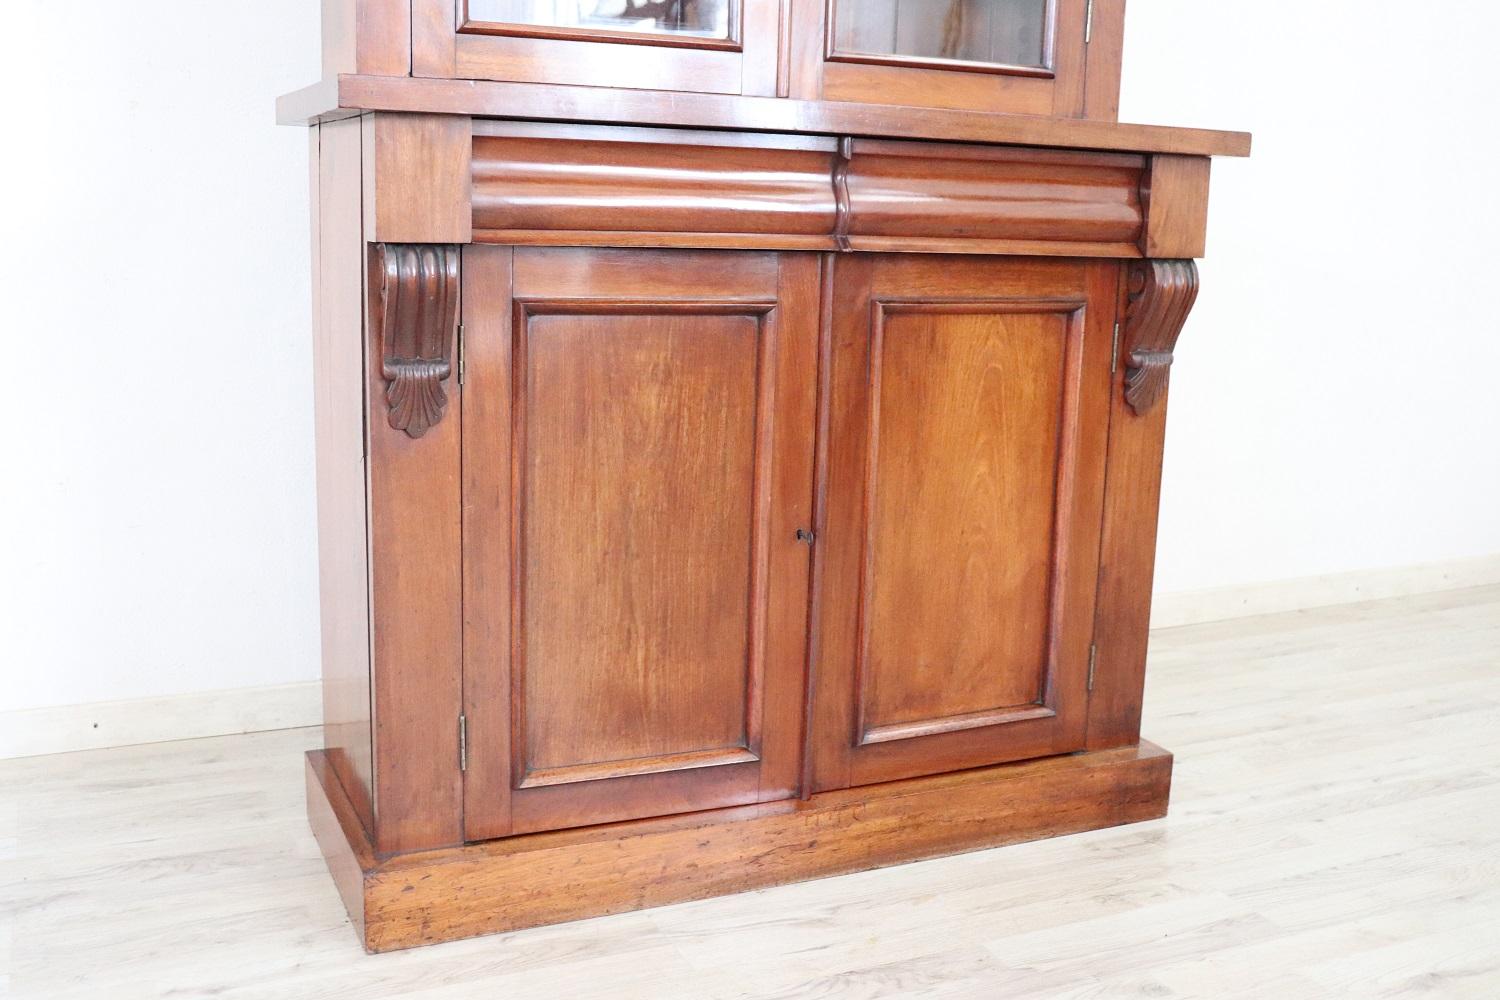 Elegant cabinet in precious mahogany 1950s. The upper part is with glasses to display your precious objects or books. Equipped with two practical drawers. Truly elegant and important for any room in the house. Perfect condition ready to be placed in